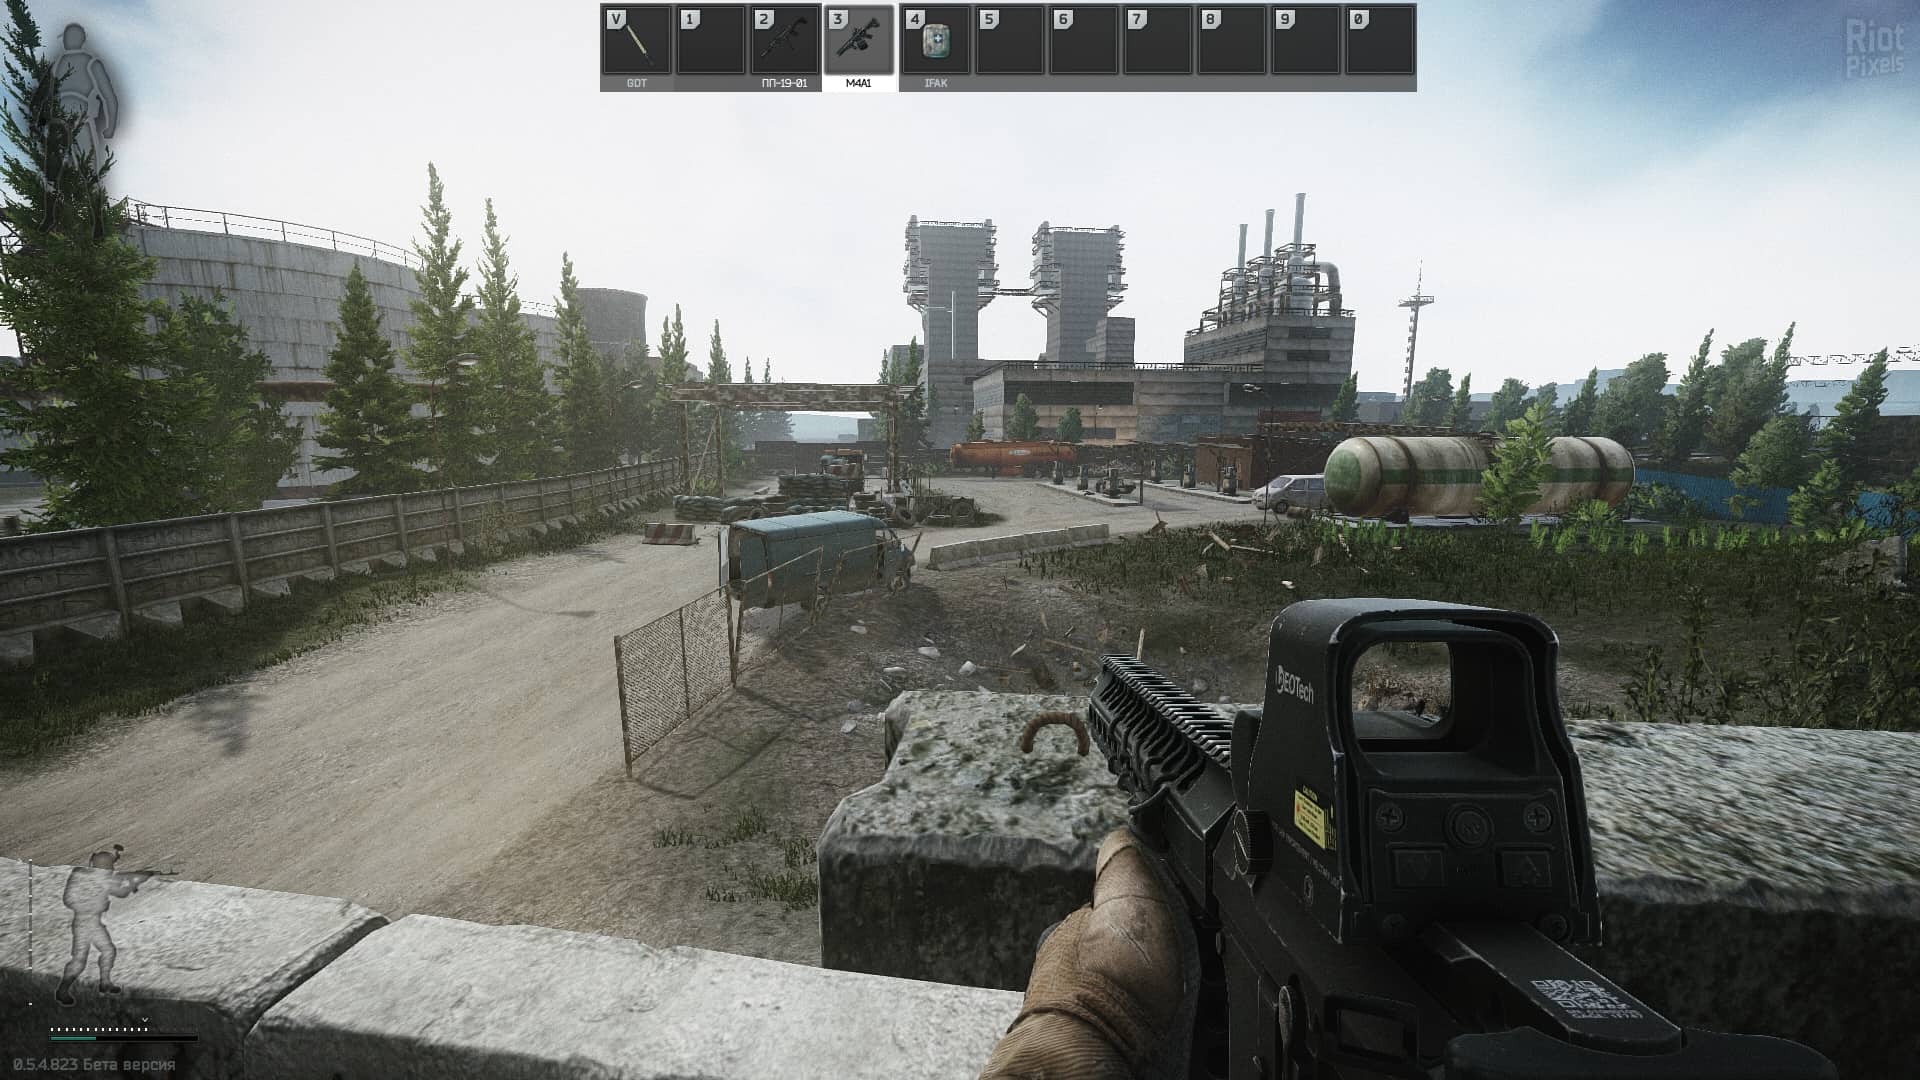 Escape from tarkov download for pc free multiversus mobile download